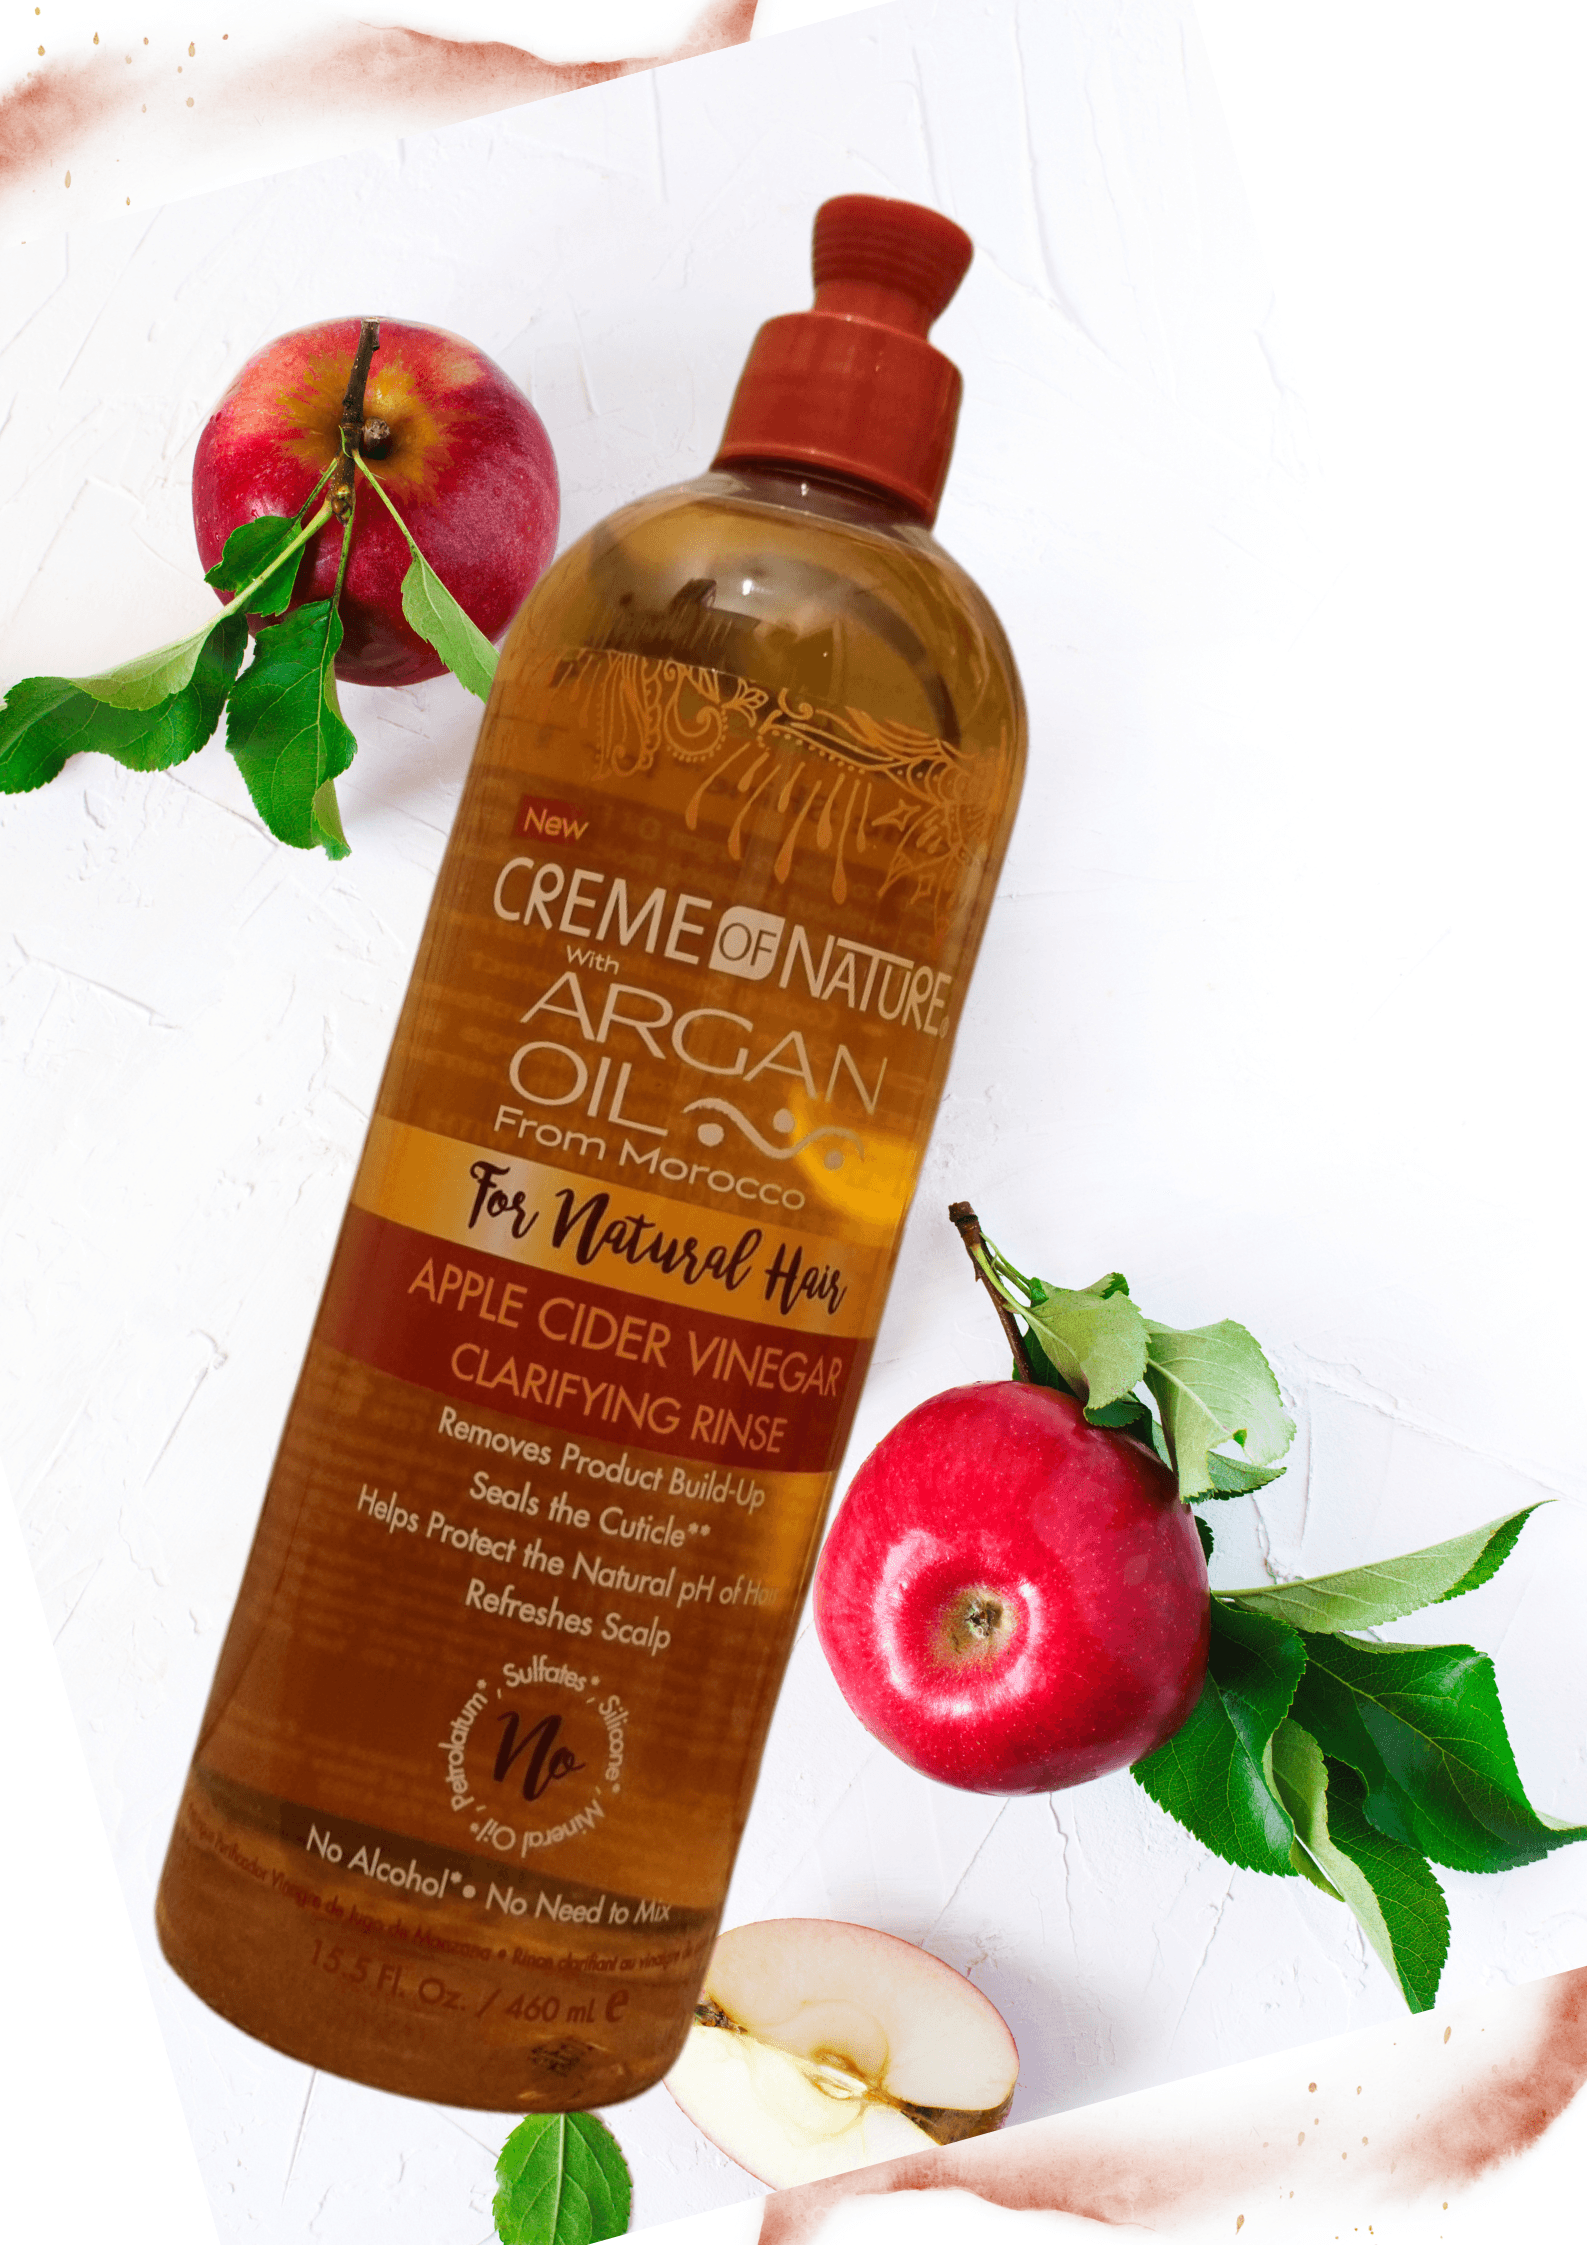 Creme of Nature Apple Cider Vinegar Clarifying Rinse For Natural Hair - LocsNco